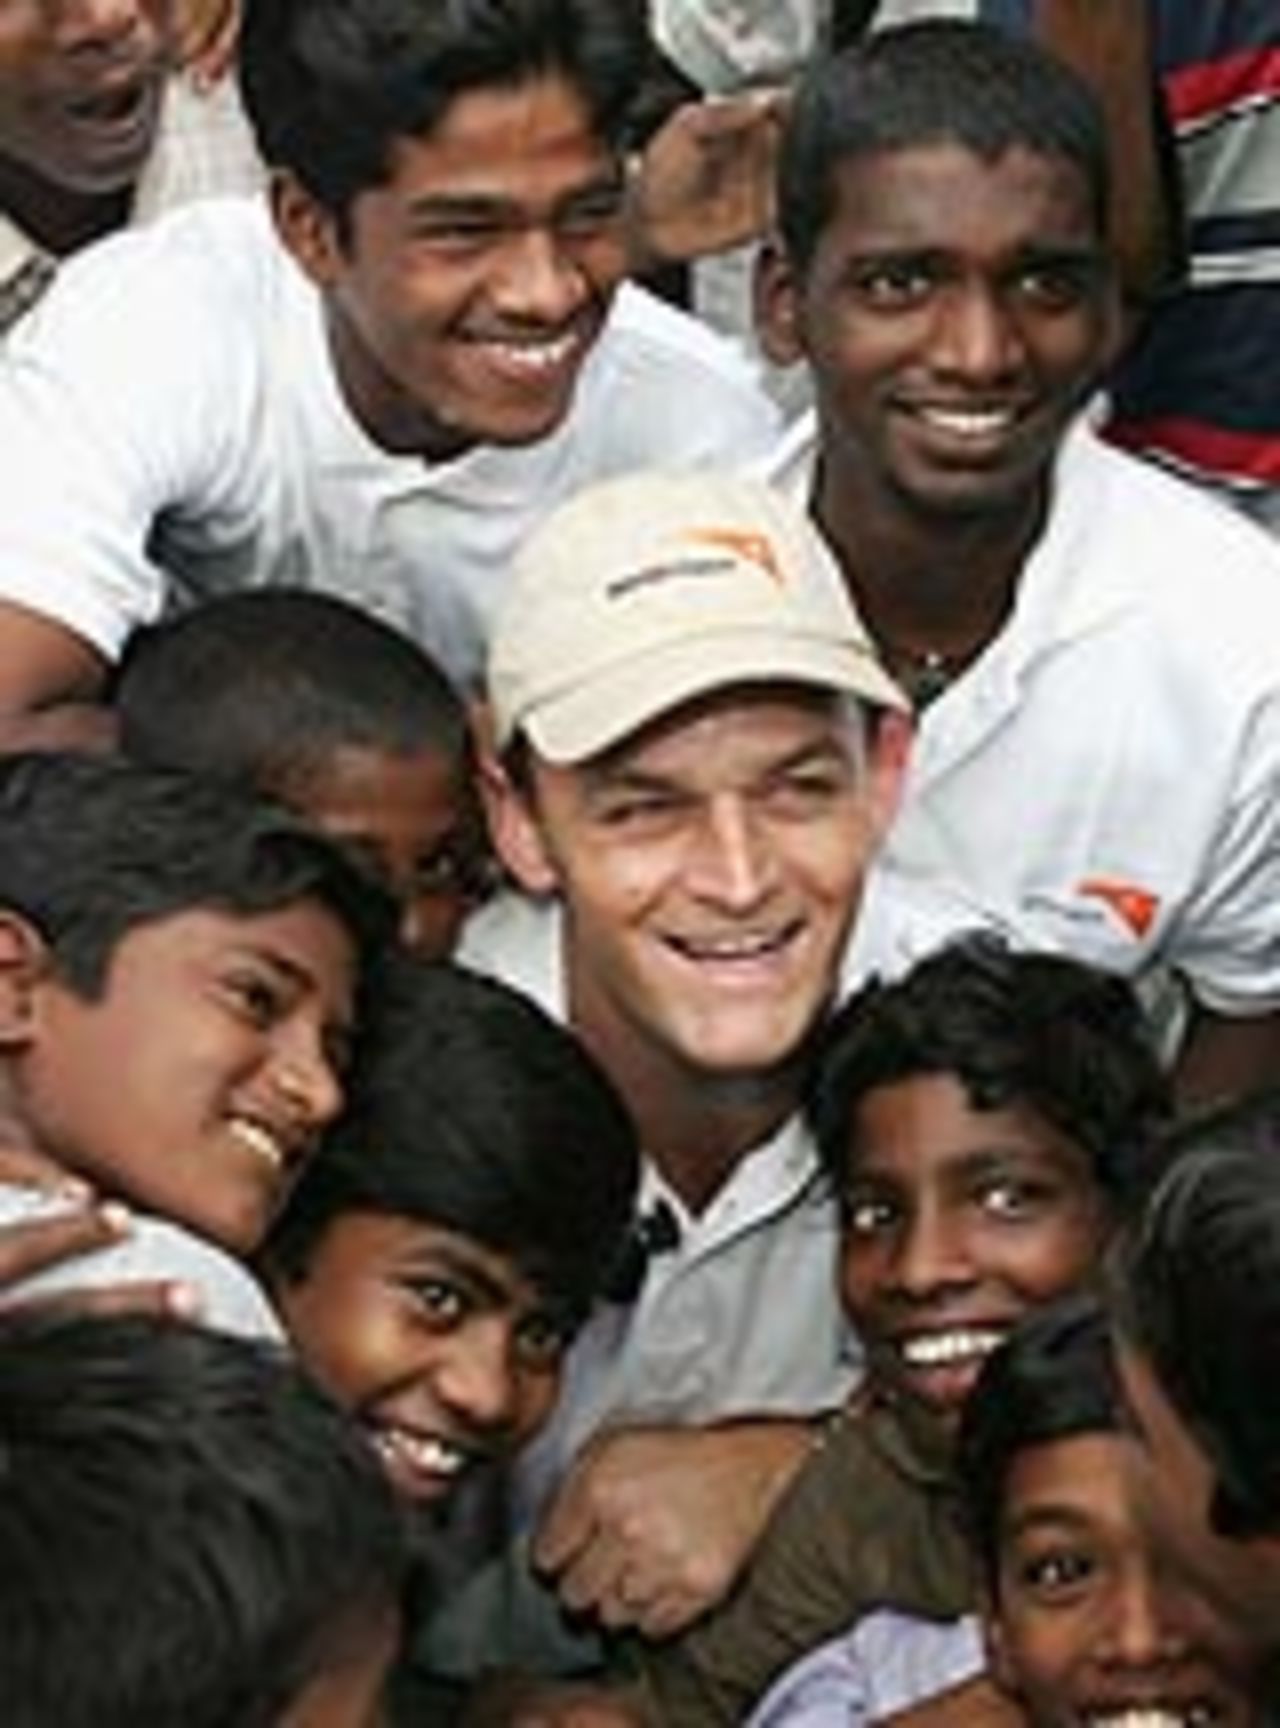 Adam Gilchrist surrounded by fans, Australia in India, Chennai, October 12, 2004